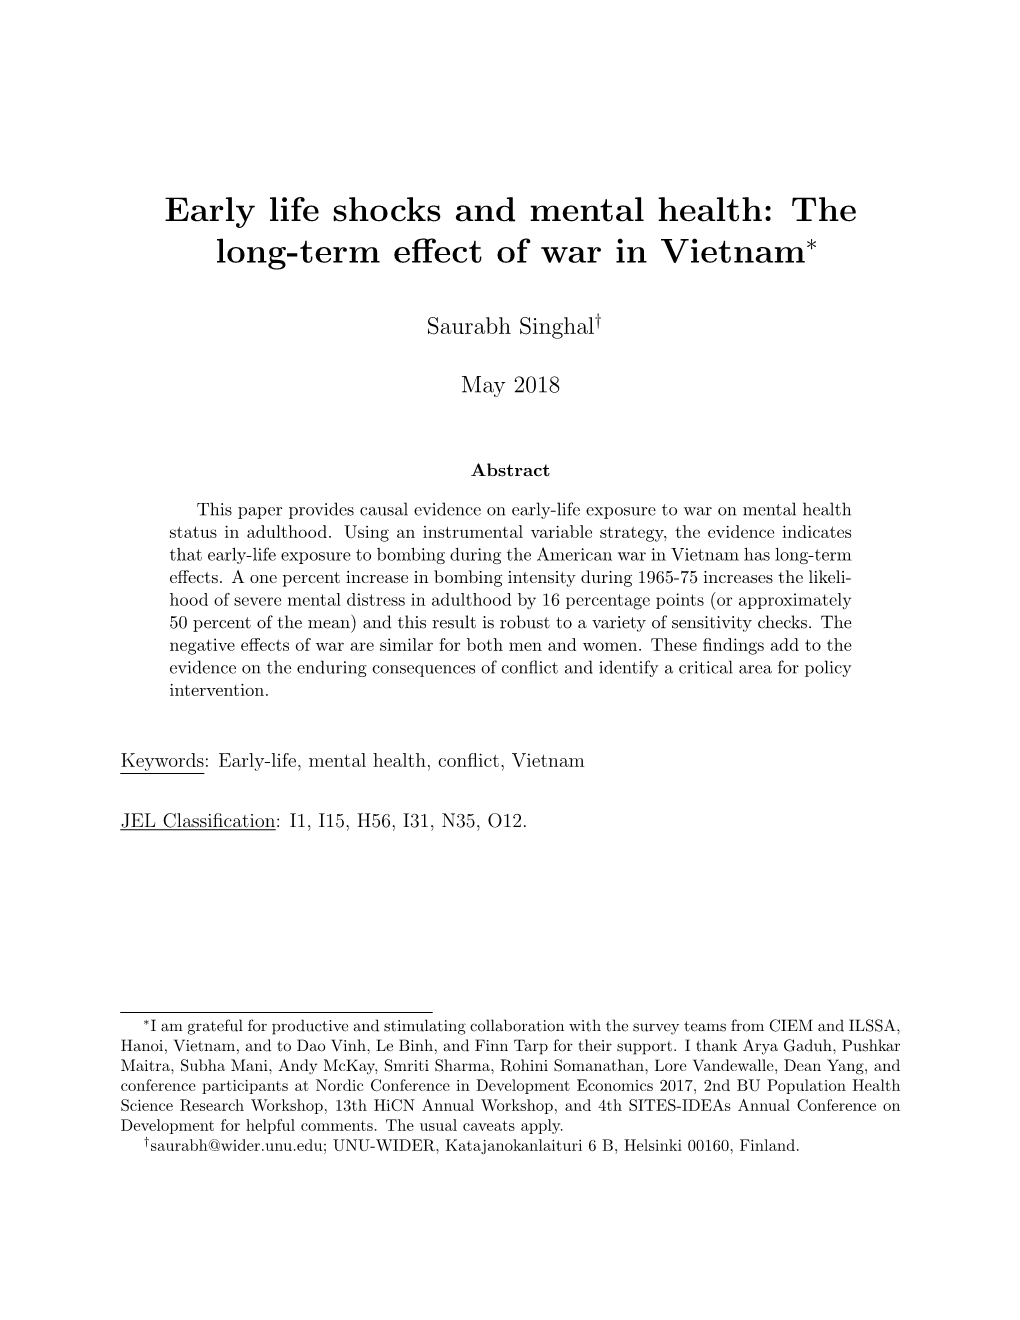 Early Life Shocks and Mental Health: the Long-Term Eﬀect of War in Vietnam∗